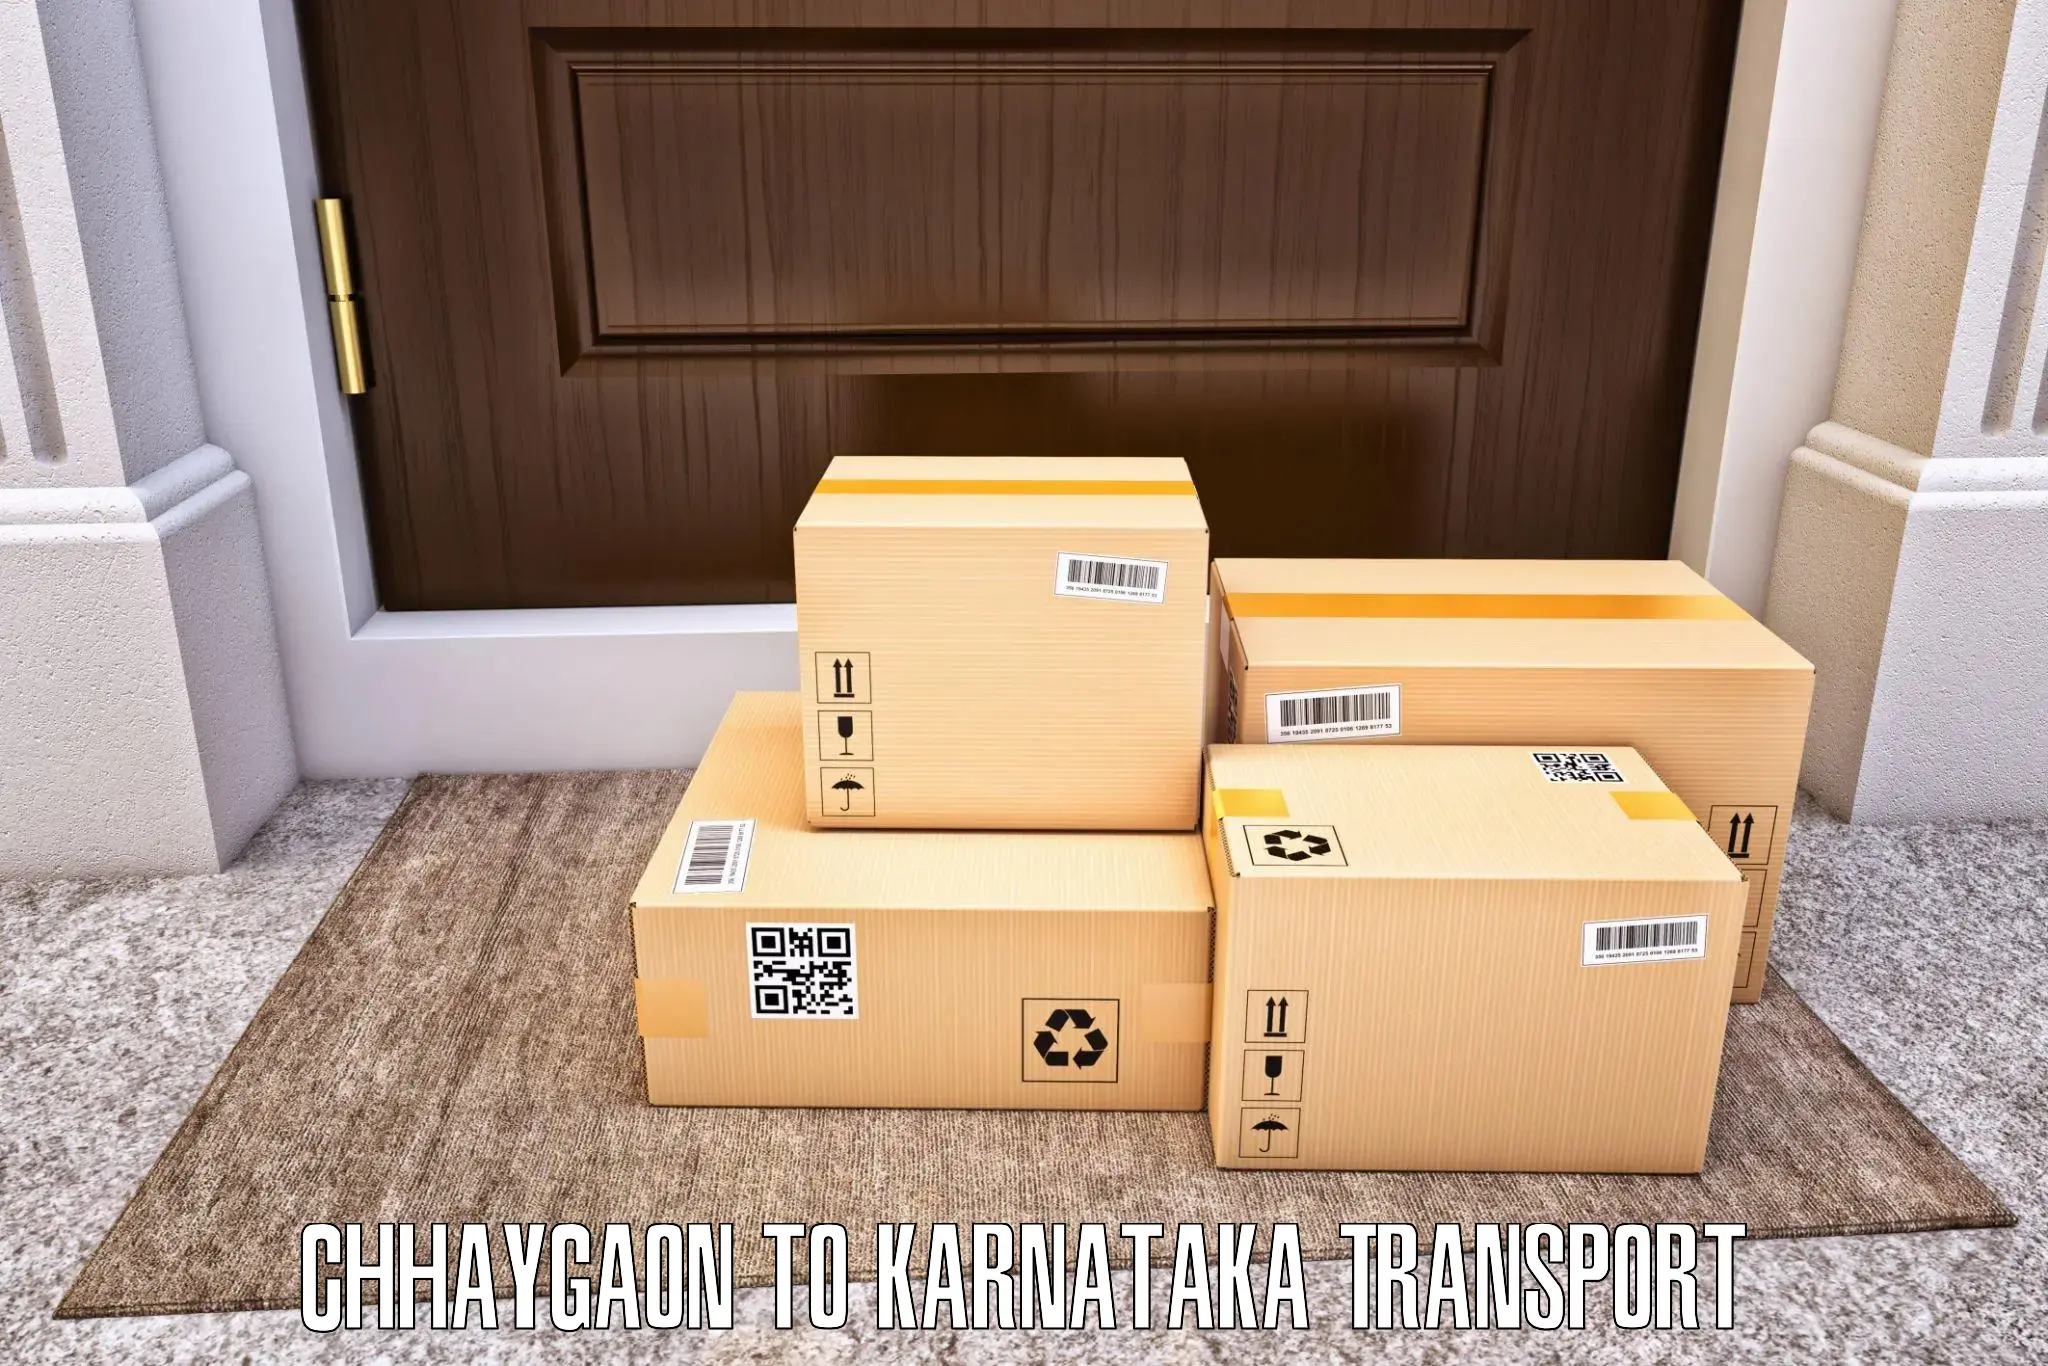 Truck transport companies in India Chhaygaon to Belagavi